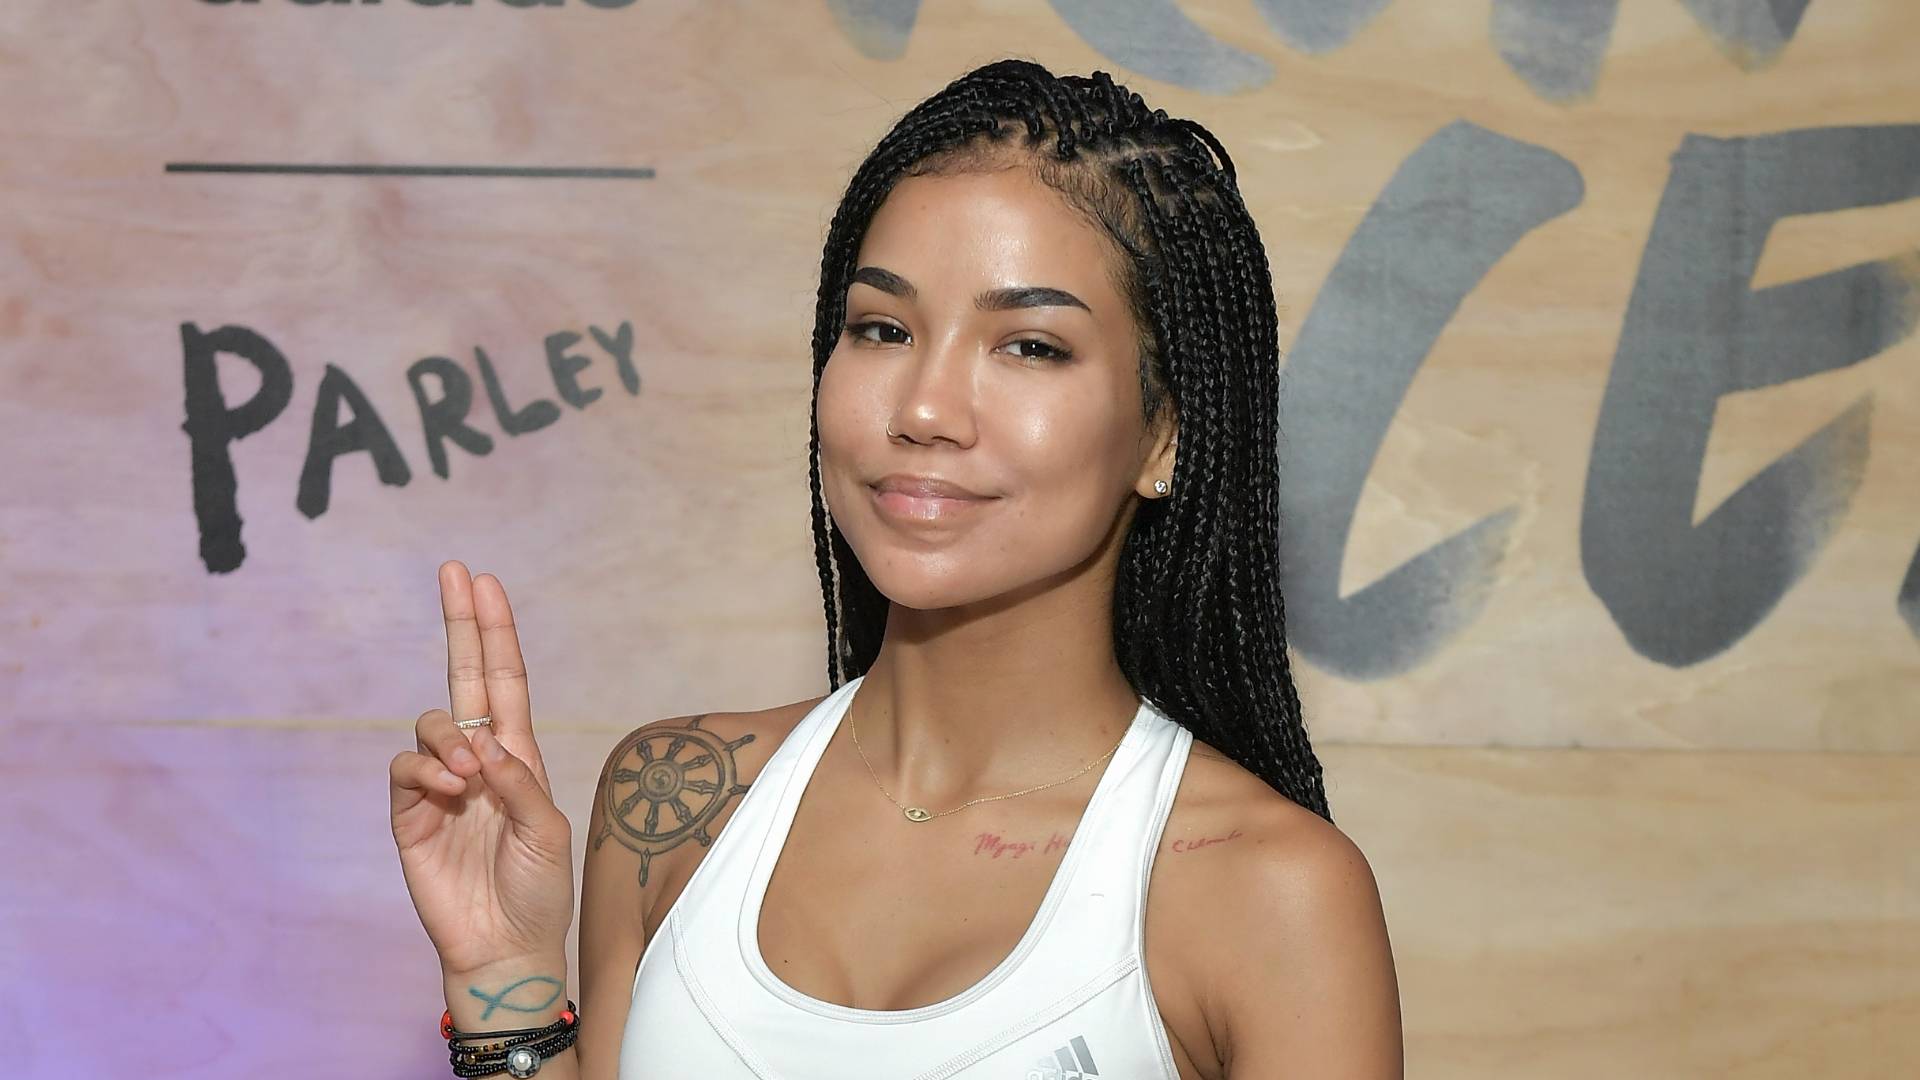 Singer Jhene Aiko attends adidas x Parley 'Run For The Oceans' event, harnessing the power of sport and continued fight against the threat of marine plastic pollution, at Temescal Park in Los Angeles, CA at Temescal Gateway Park on June 8, 2018 in Pacific Palisades, California. 